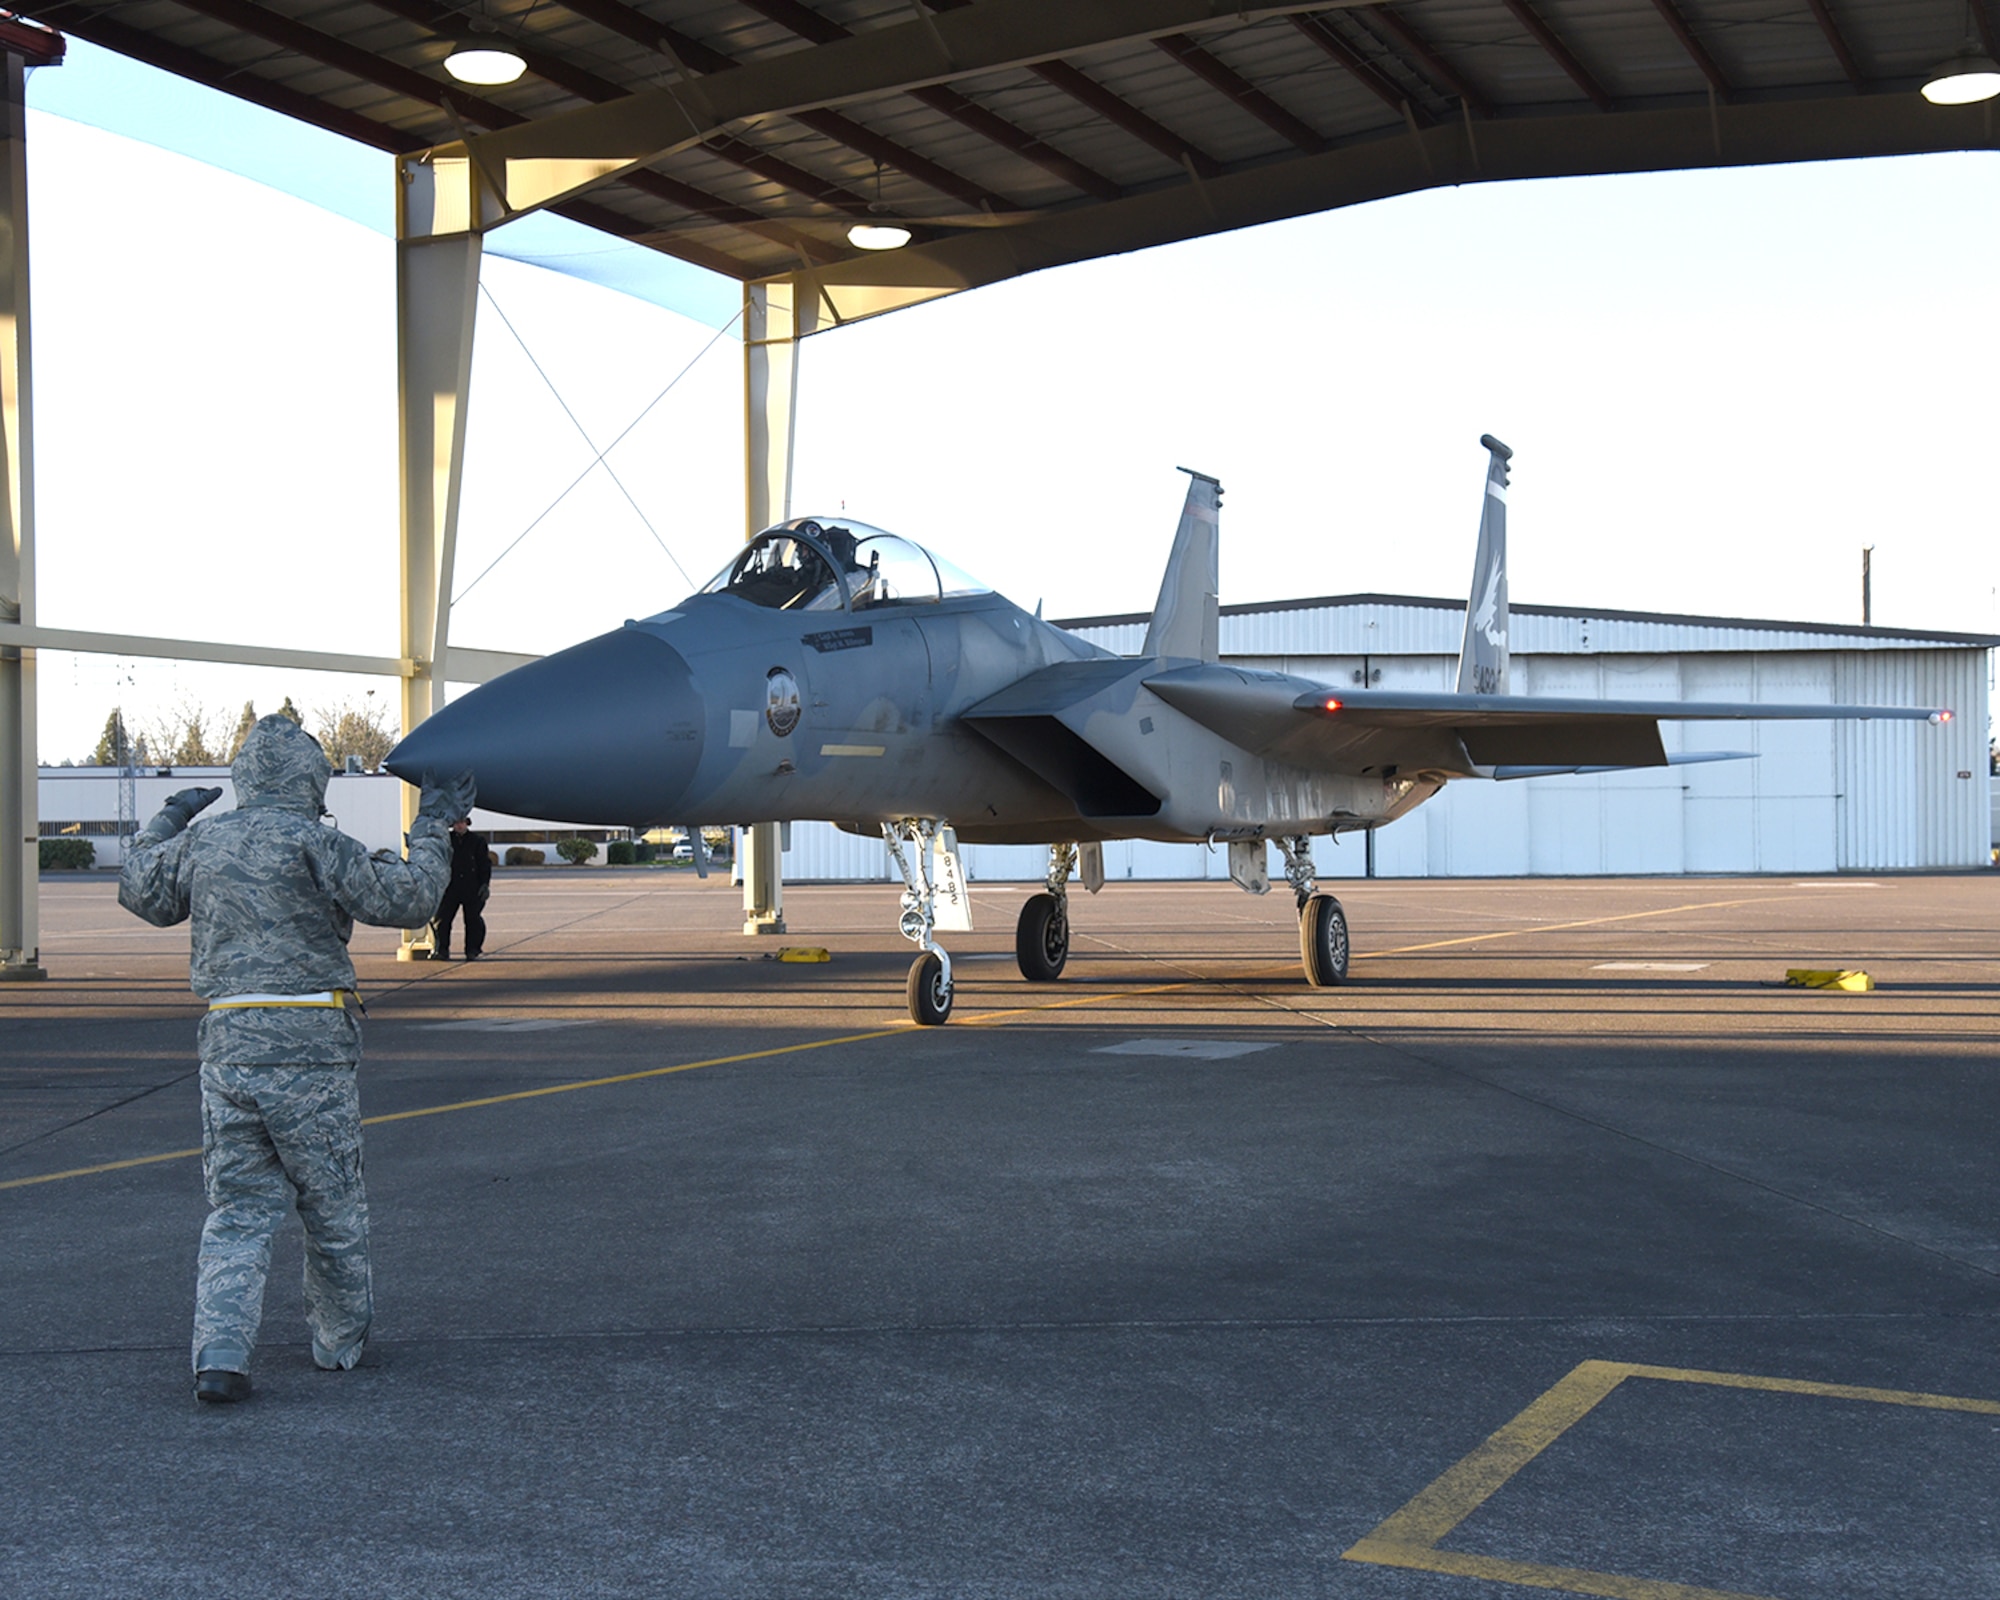 Crew Chief, Master Sgt. Mark Billmyer, 142nd Aircraft Maintenance Squadron, marshals F-15C Eagle 78-482 for its first launch with a new wing, Portland Air National Guard Base, Ore., Jan. 3, 2017. (U.S. Air National Guard photo by Senior Master Sgt. Shelly Davison, 142nd Fighter Wing Public Affairs)

